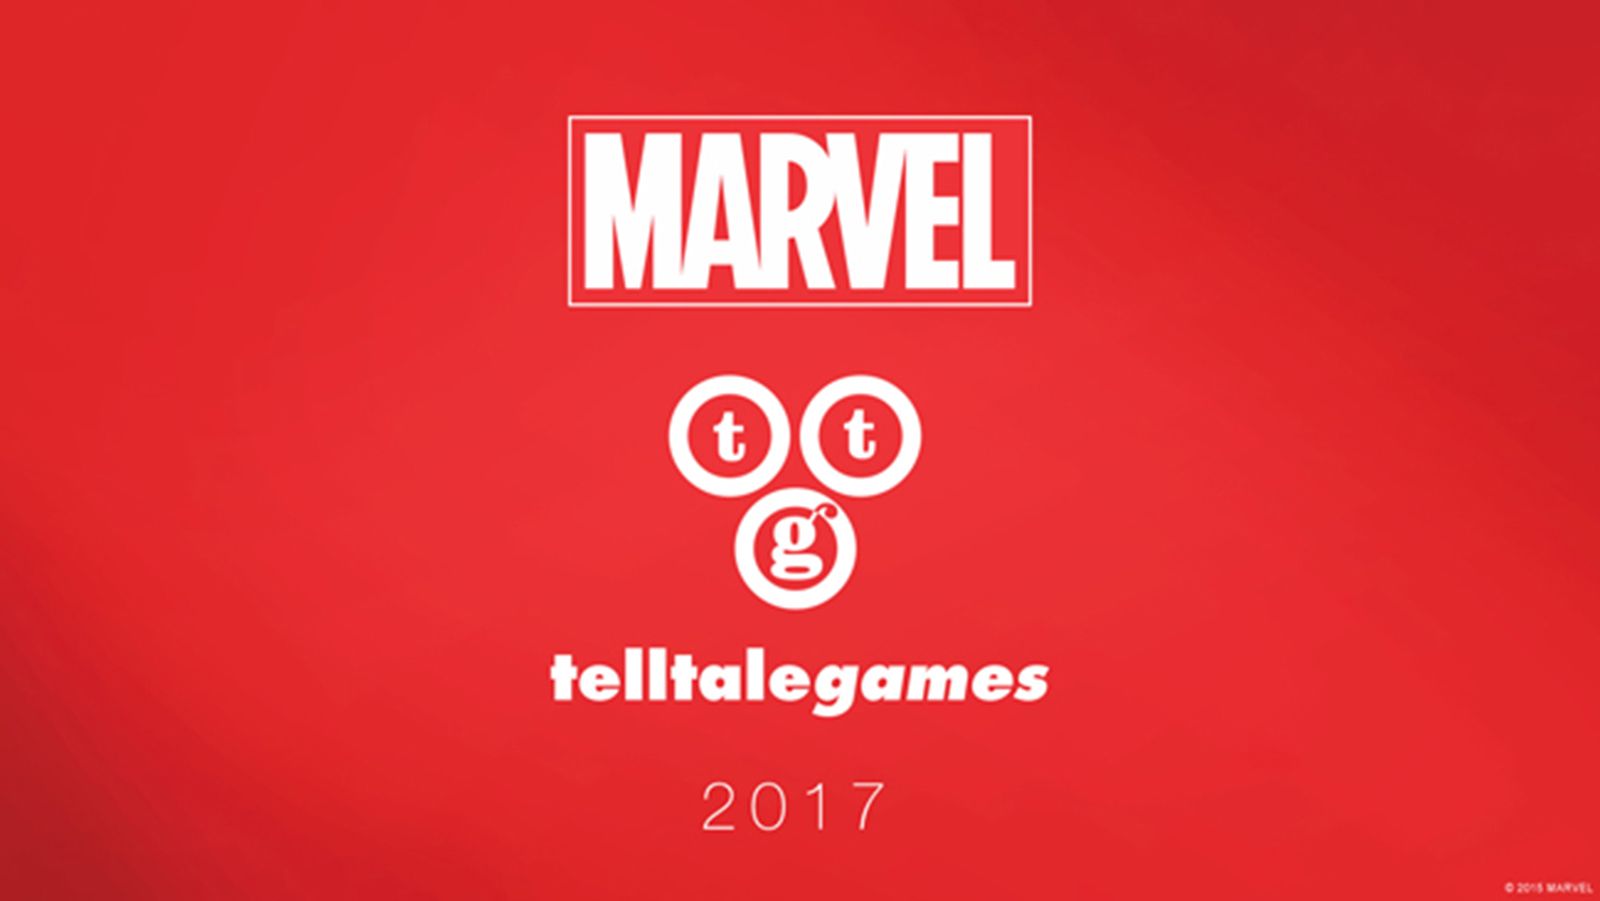 marvel and telltale games announce team up for 2017 game image 1